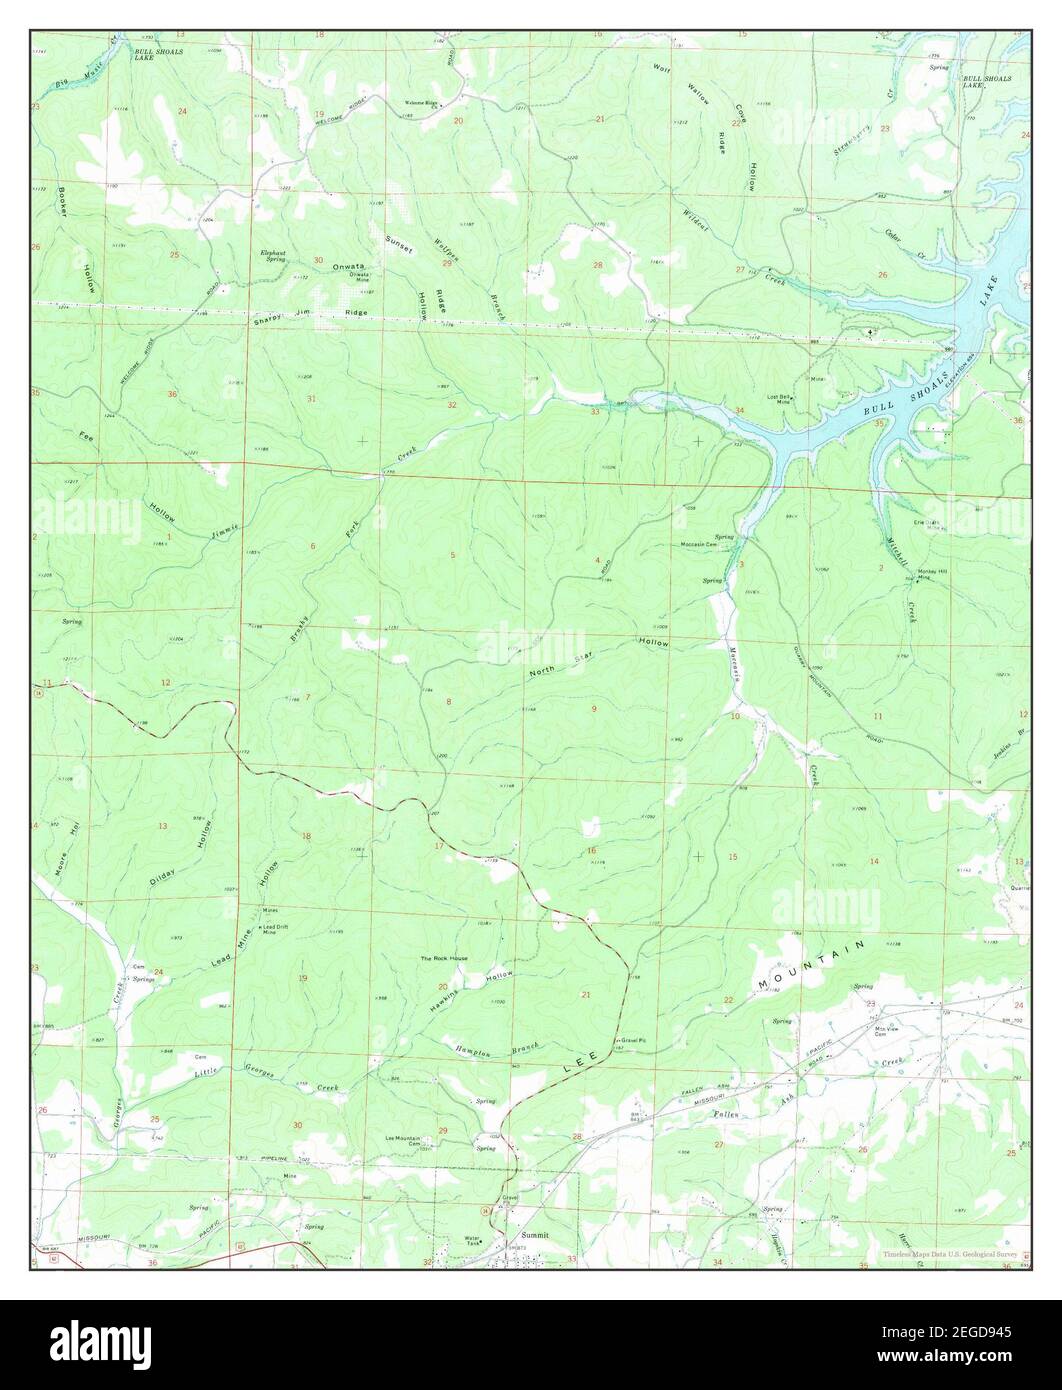 Cotter SW, Arkansas, map 1972, 1:24000, United States of America by Timeless Maps, data U.S. Geological Survey Stock Photo